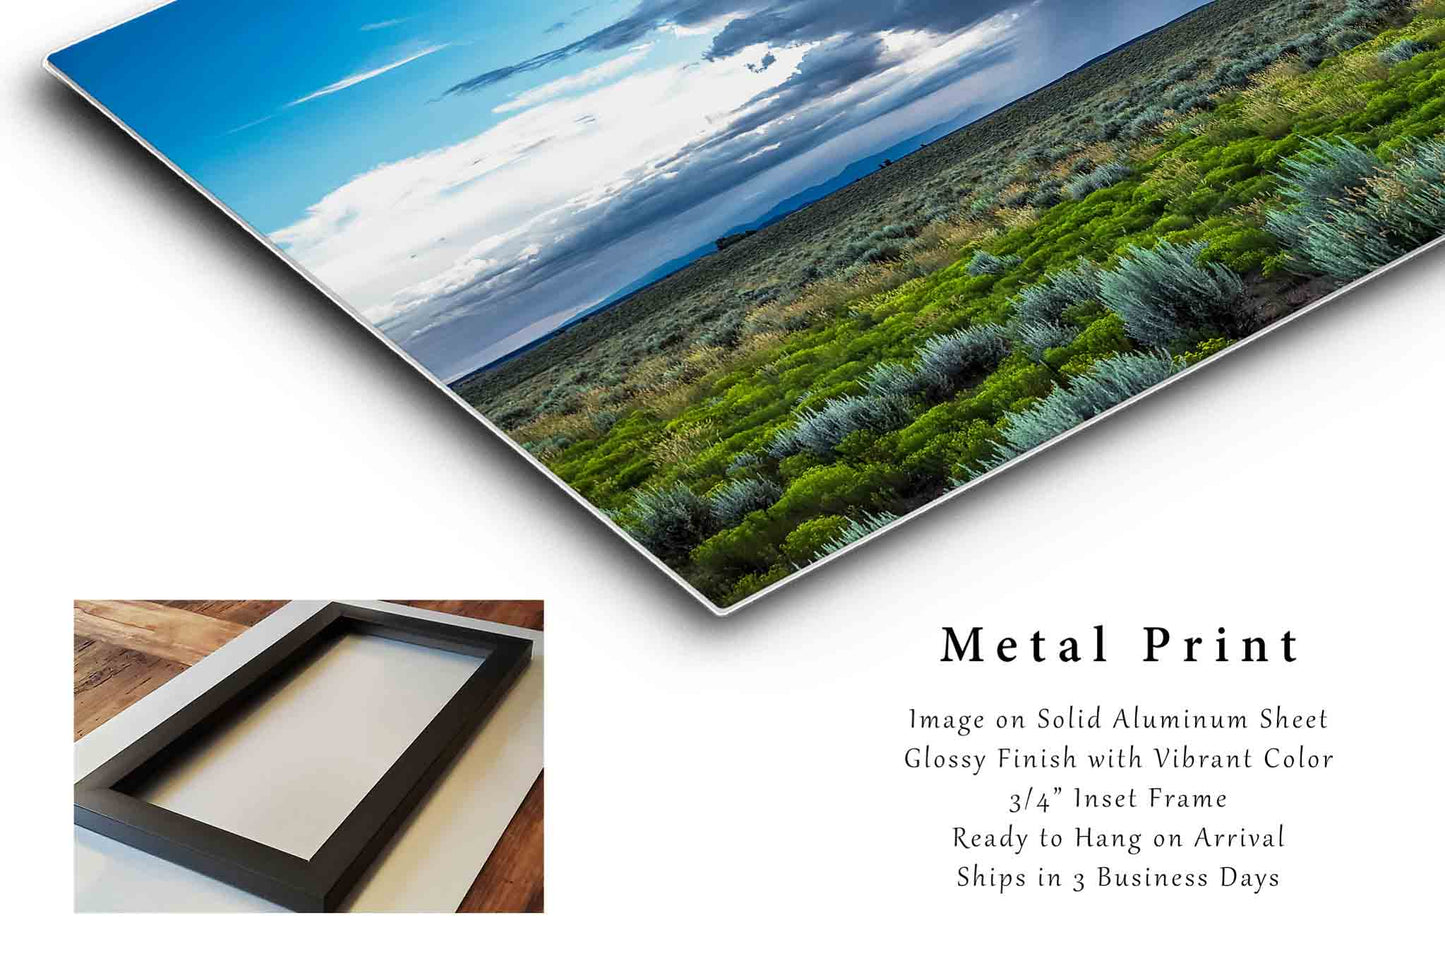 Storm Metal Print | Monsoon Thunderstorm Over Sagebrush Photo | Taos Photography | New Mexico Picture | Western Decor